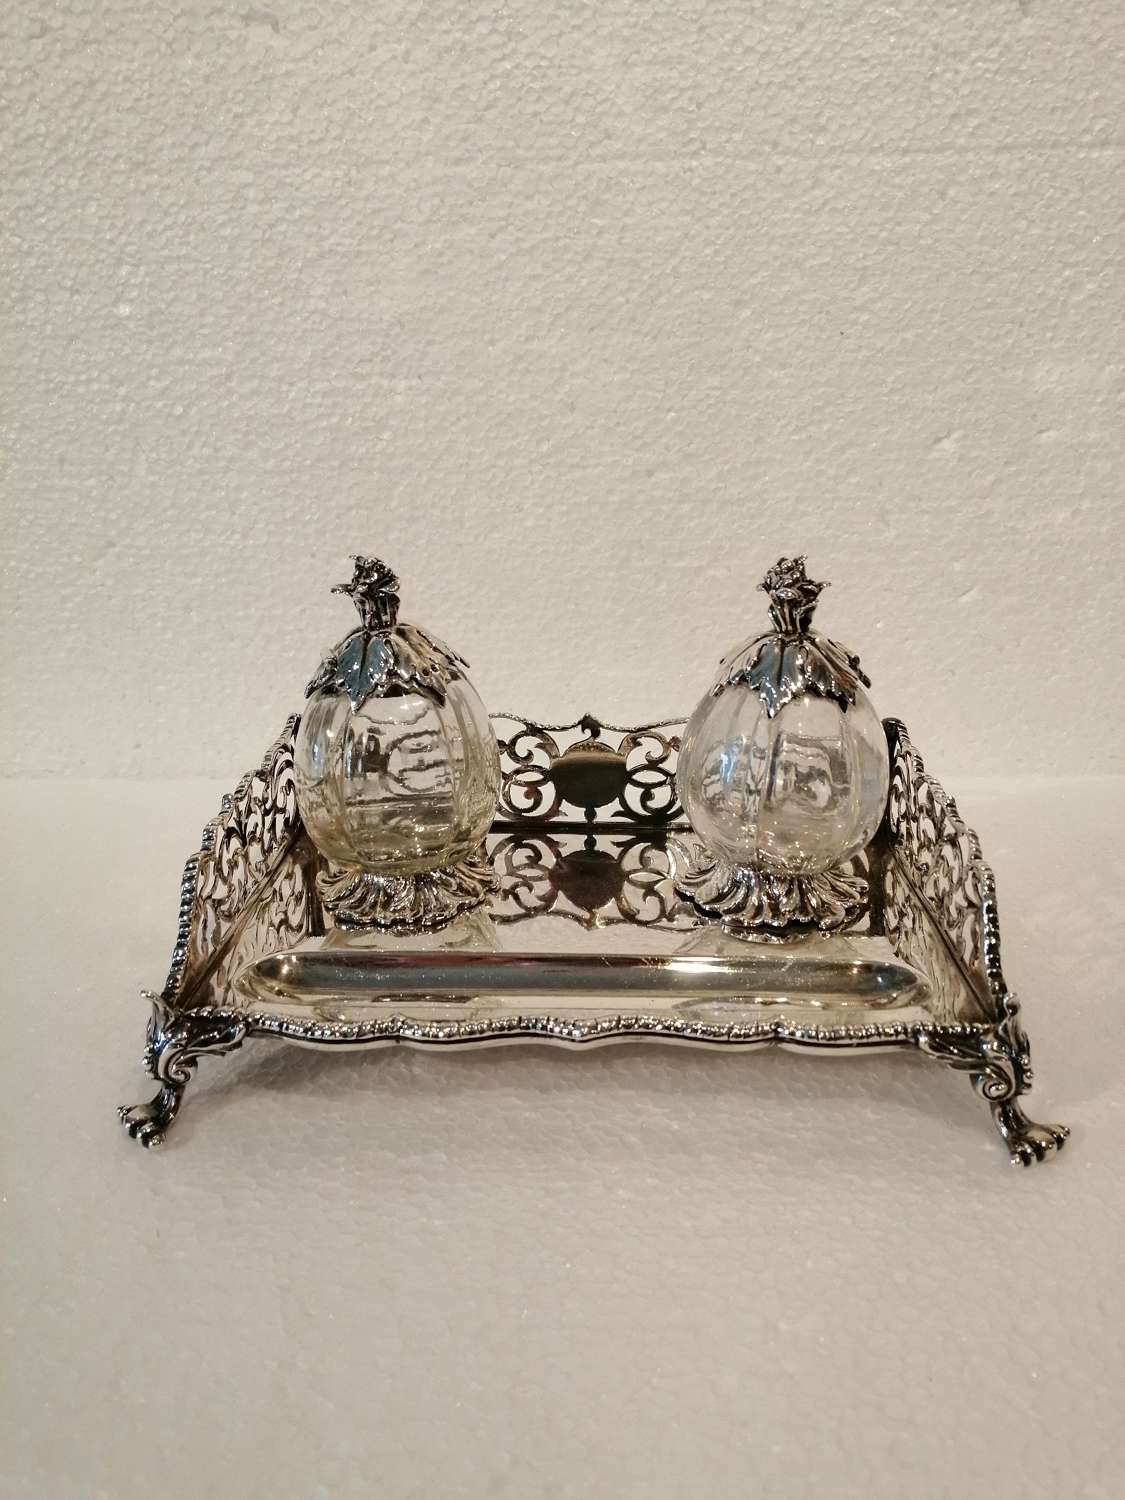 A fine quality 19th century silver inkstand